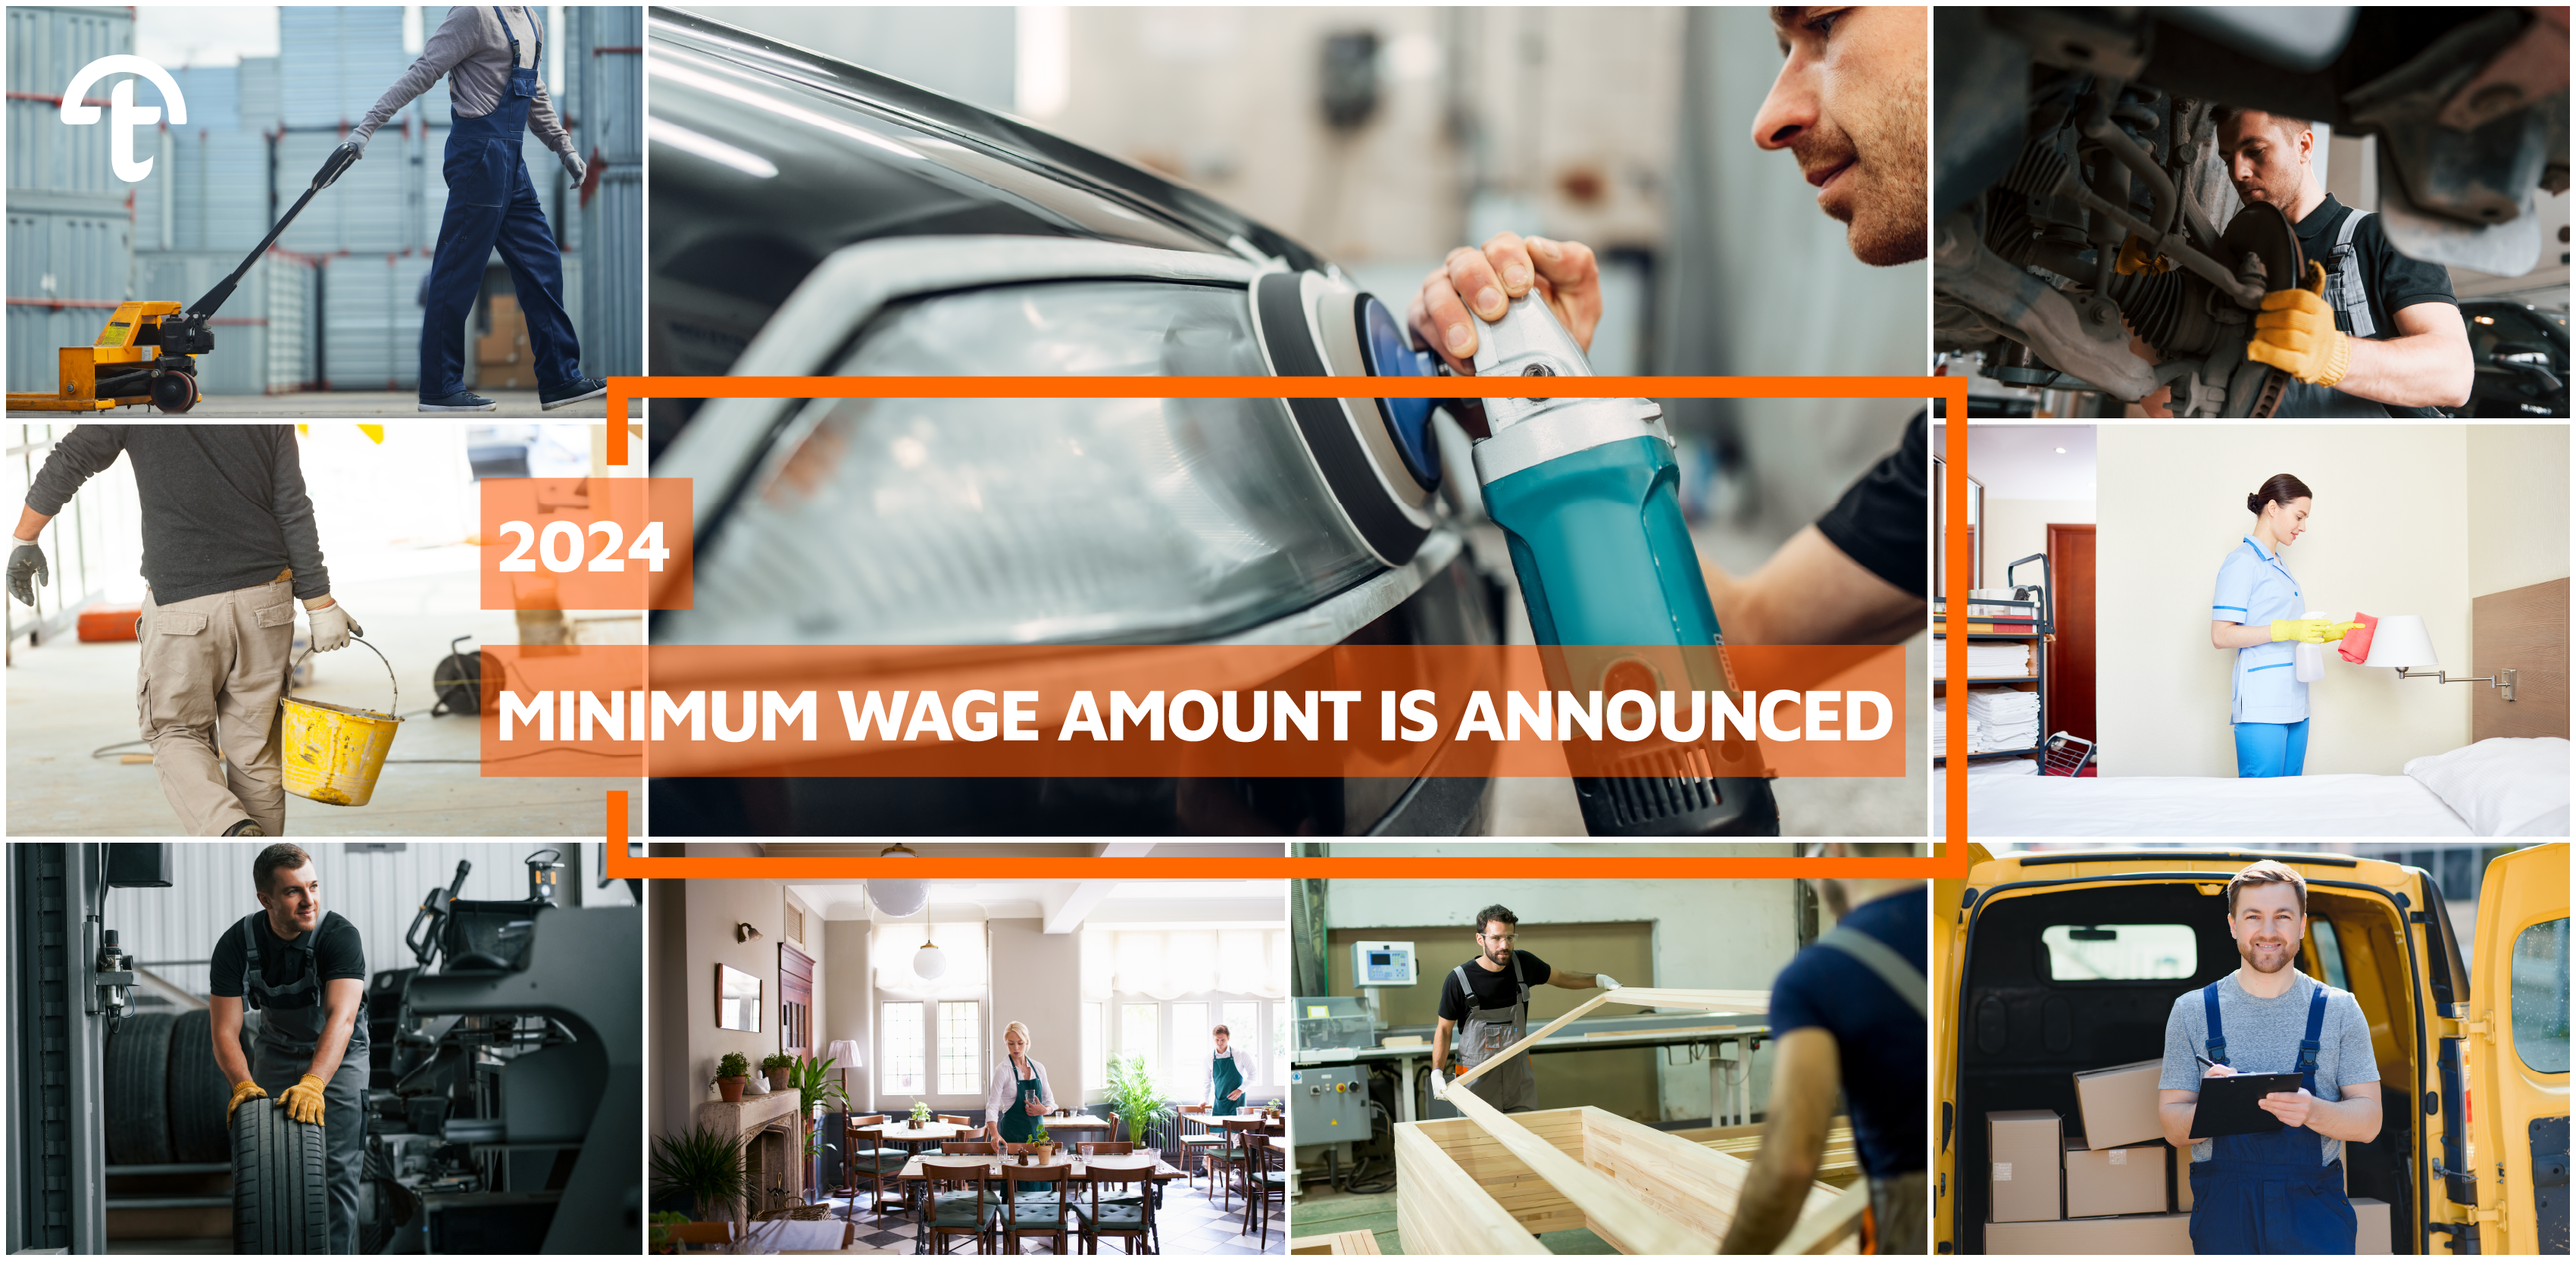 2024 Minimum Wage Amount is Announced